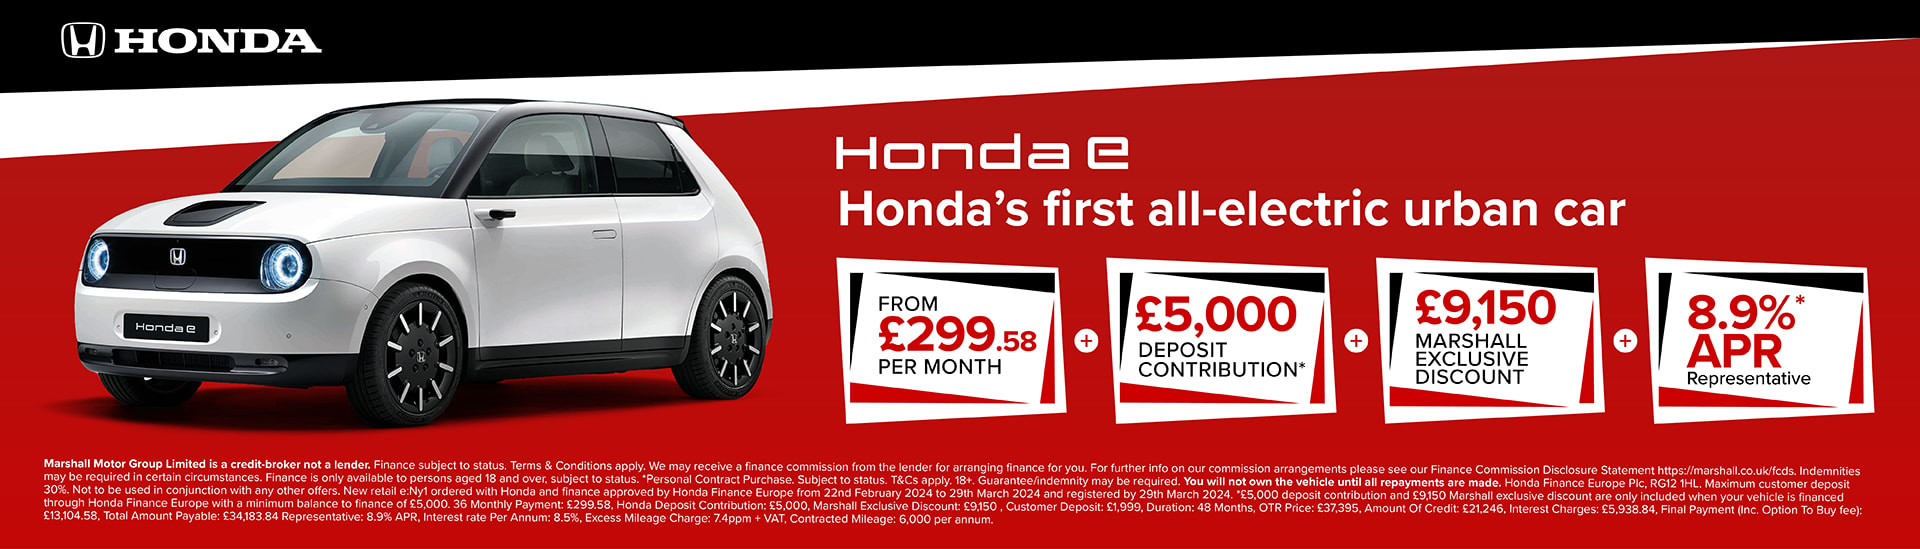 HONDA E PERSONAL CONTRACT PURCHASE EXCLUSIVE OFFER